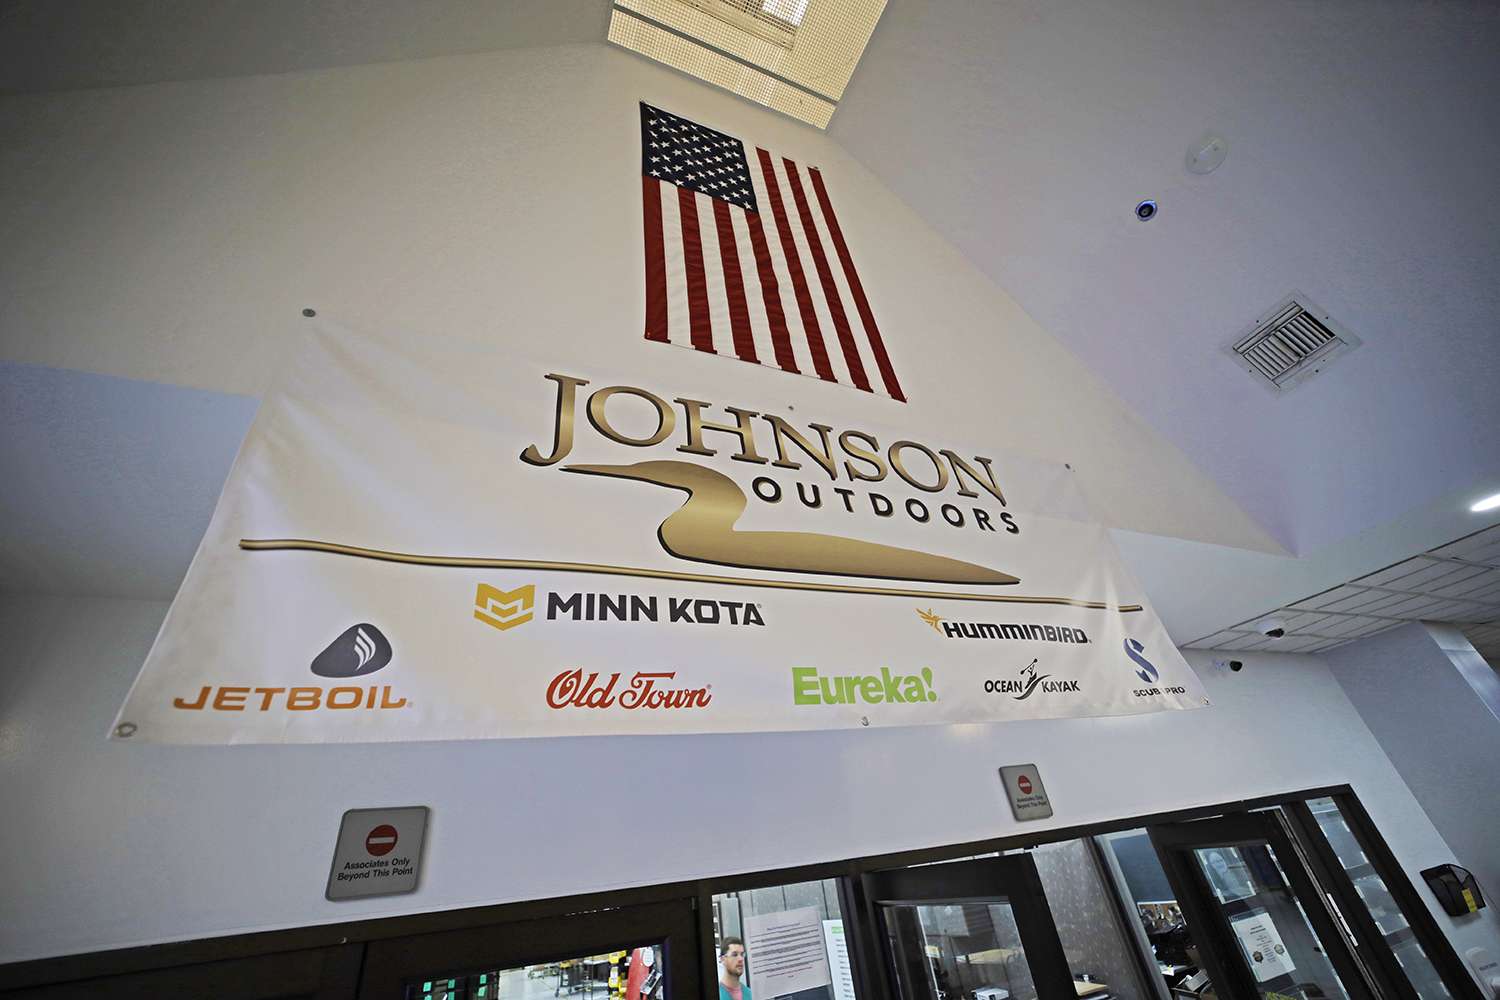 Humminbird is a part of the Johnson Outdoors family, along with a bunch of other highly reputable brands. Proud American manufacturing. 